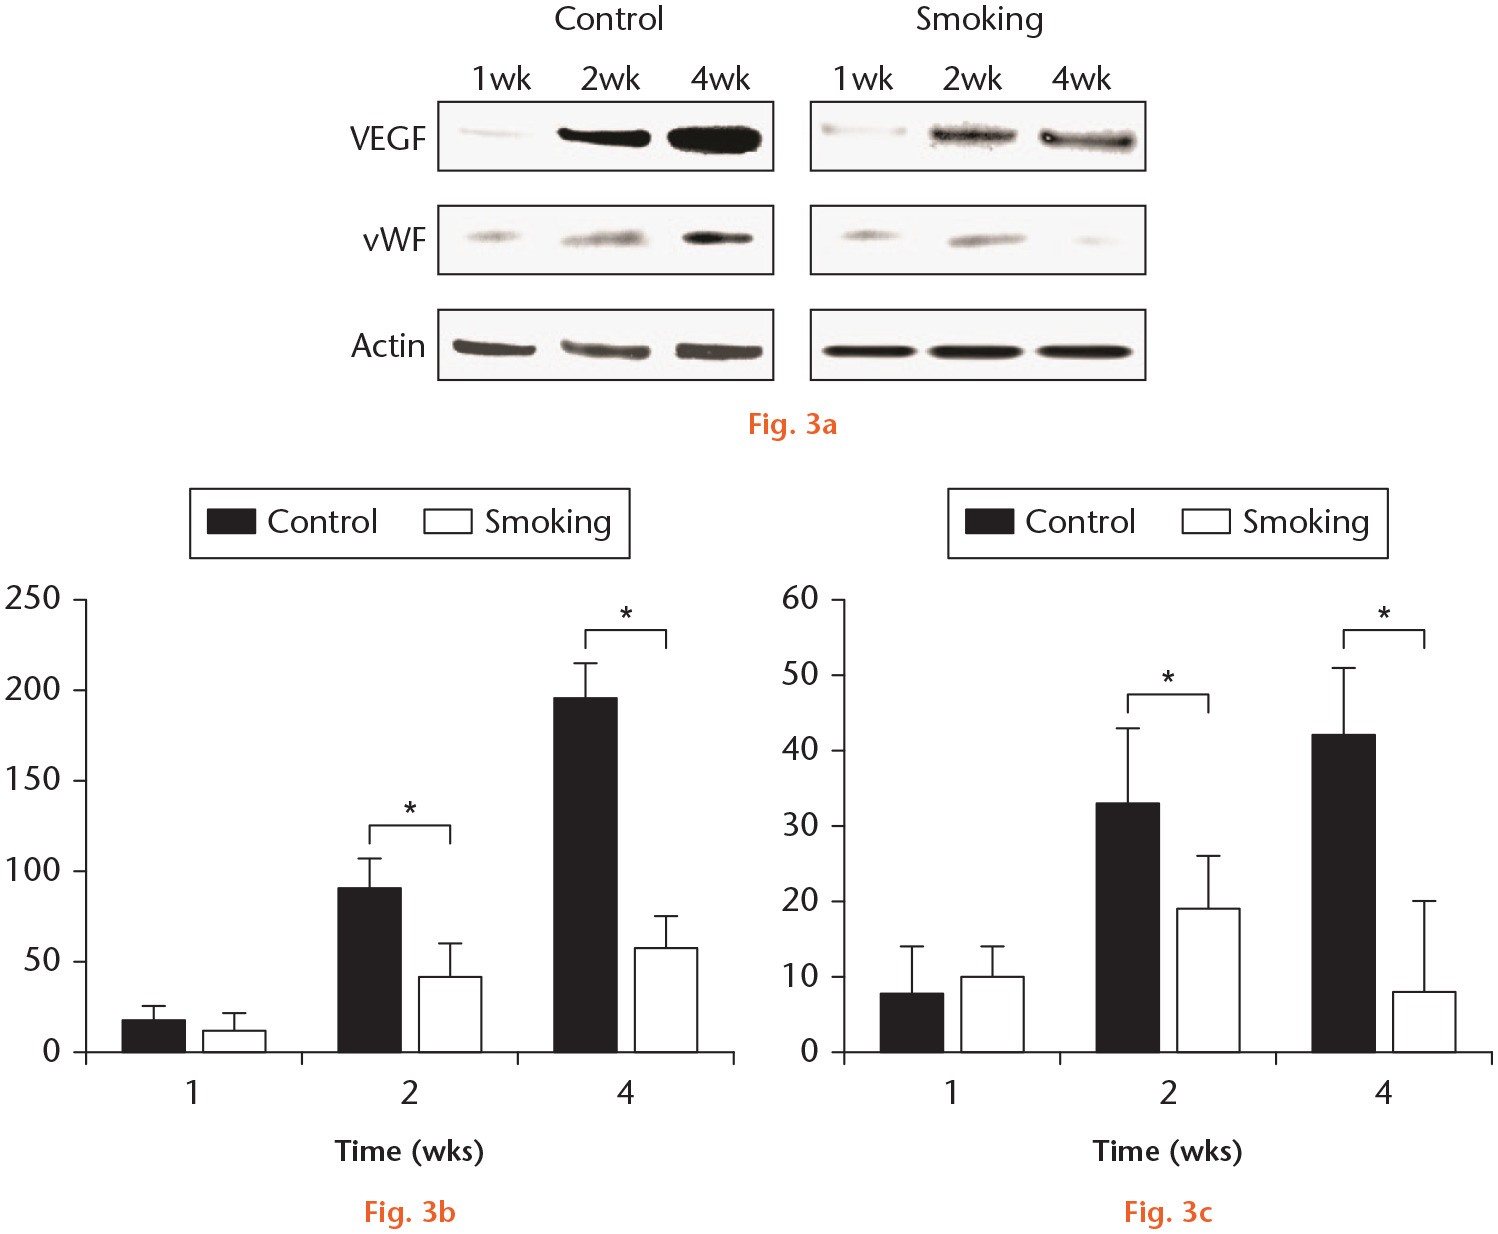 Fig. 3 
            Cigarette smoke inhalation reduced the expression of vascular endothelial growth factor (VEGF) and von Willebrand factor (vWF) protein in the fracture callus. a) Western blot analysis was used to detect the expression of VEGF and vWF protein in the fracture callus. β-actin was used as an internal control (n = 4). One representative data set obtained from repeated experiments is shown. b) Quantified data of Western blot analysis for the expression of VEGF in the smoking group, two and four weeks after the fracture (n = 4). c) Quantified data of Western blot analysis for expression of vWF in the smoking group, two and four weeks after the fracture (n = 4). Data are shown as the mean (SD) of six experiments. *p < 0.001 (Mann-Whitney U test).
          